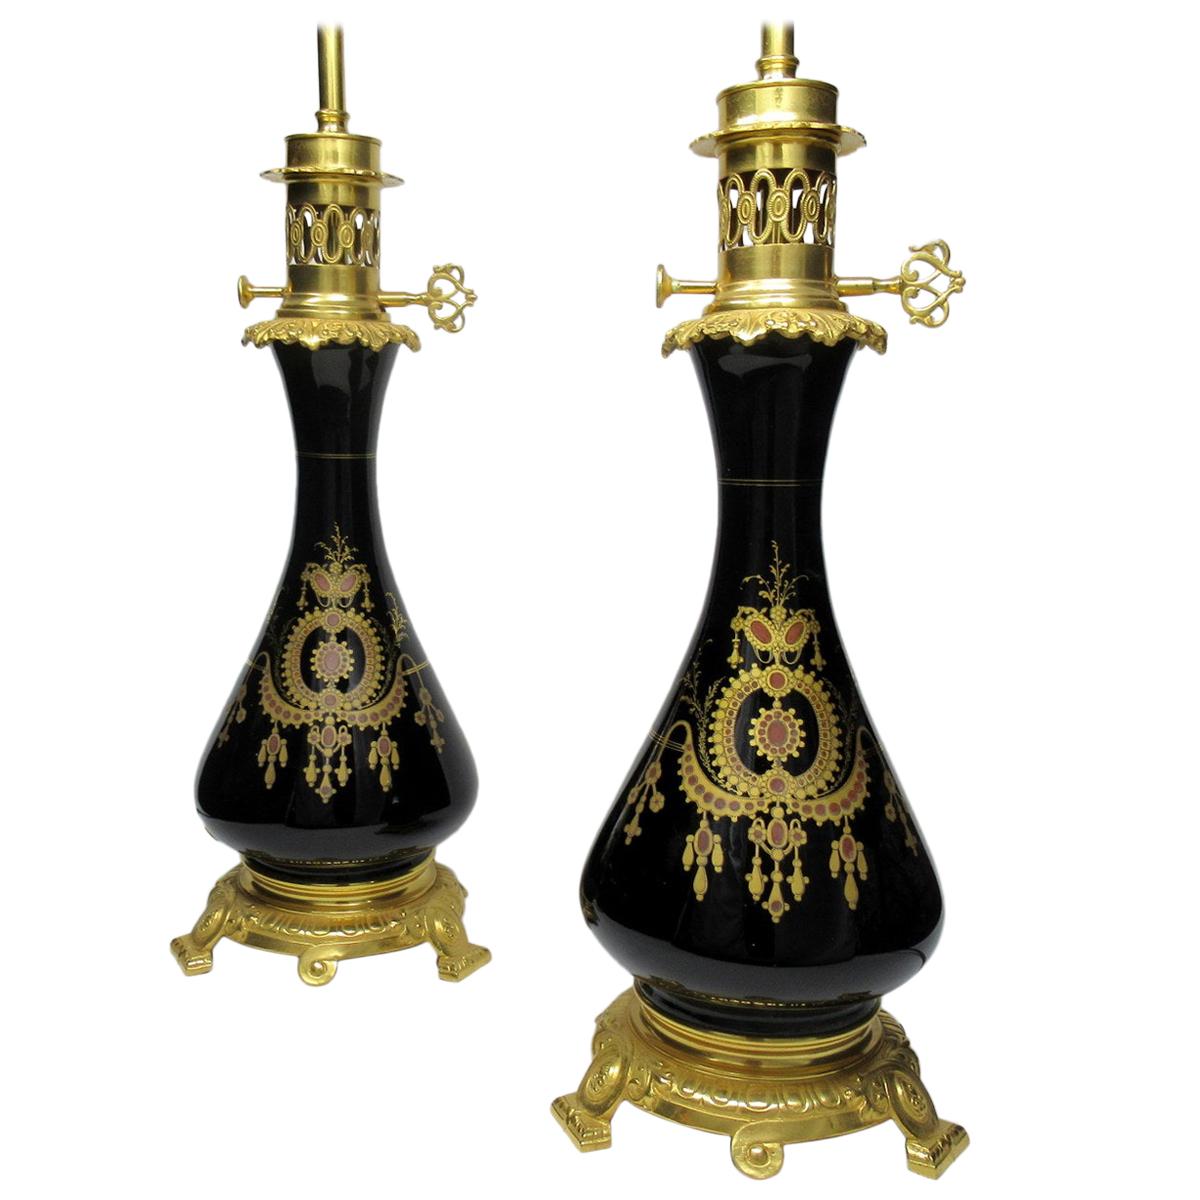 Pair of French Black Enameled Glass Ormolu Table Lamps Art Nouveau, 19th Century